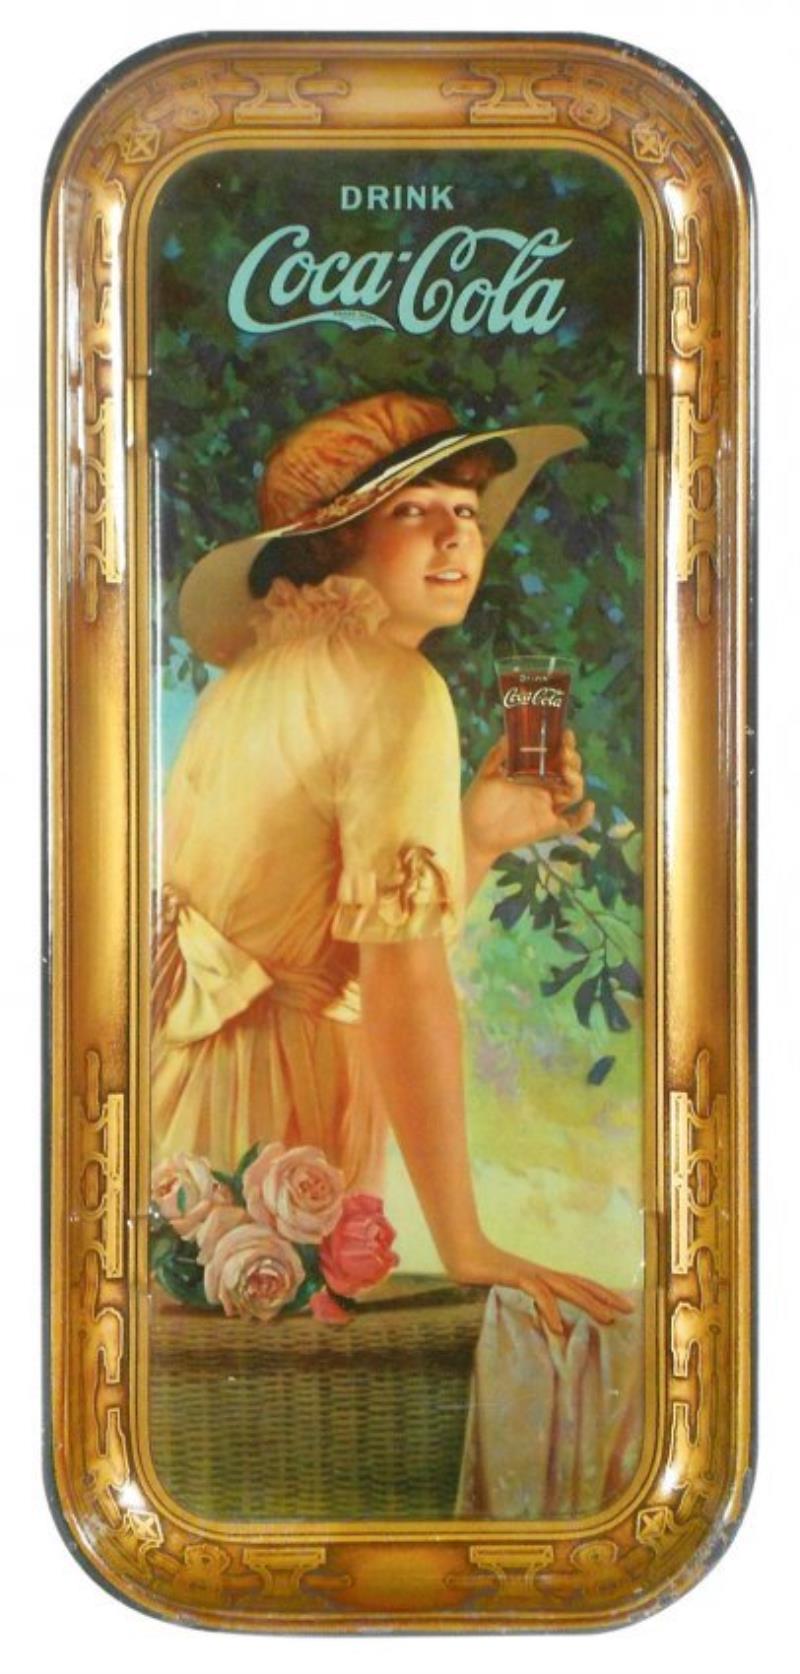 Coca-Cola serving tray, 1916 "Elaine", Stelad Signs,